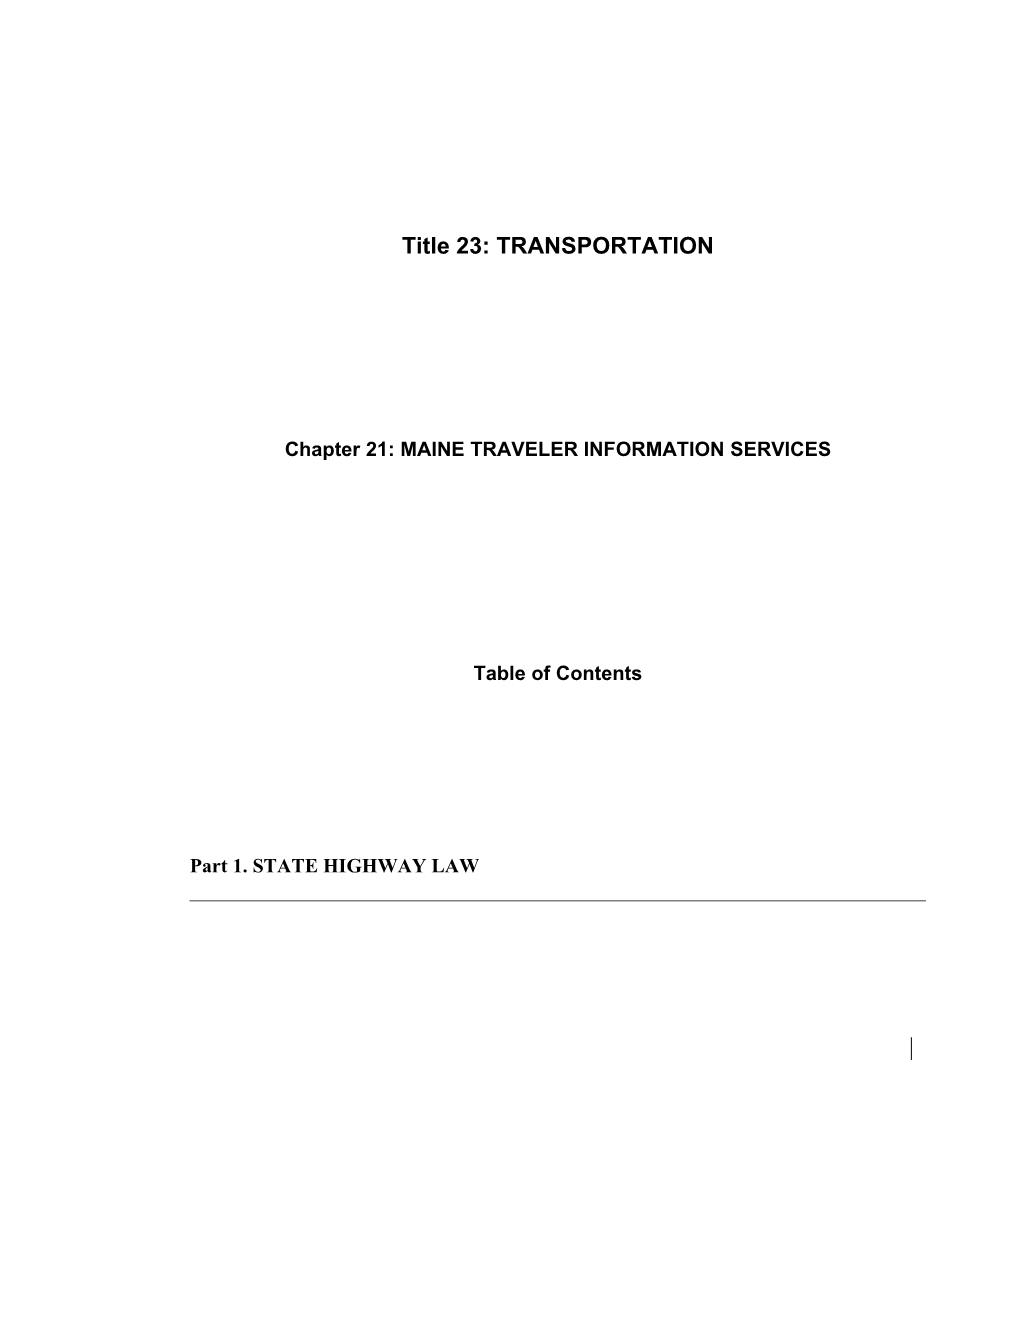 MRS Title 23, Chapter21: MAINE TRAVELER INFORMATION SERVICES